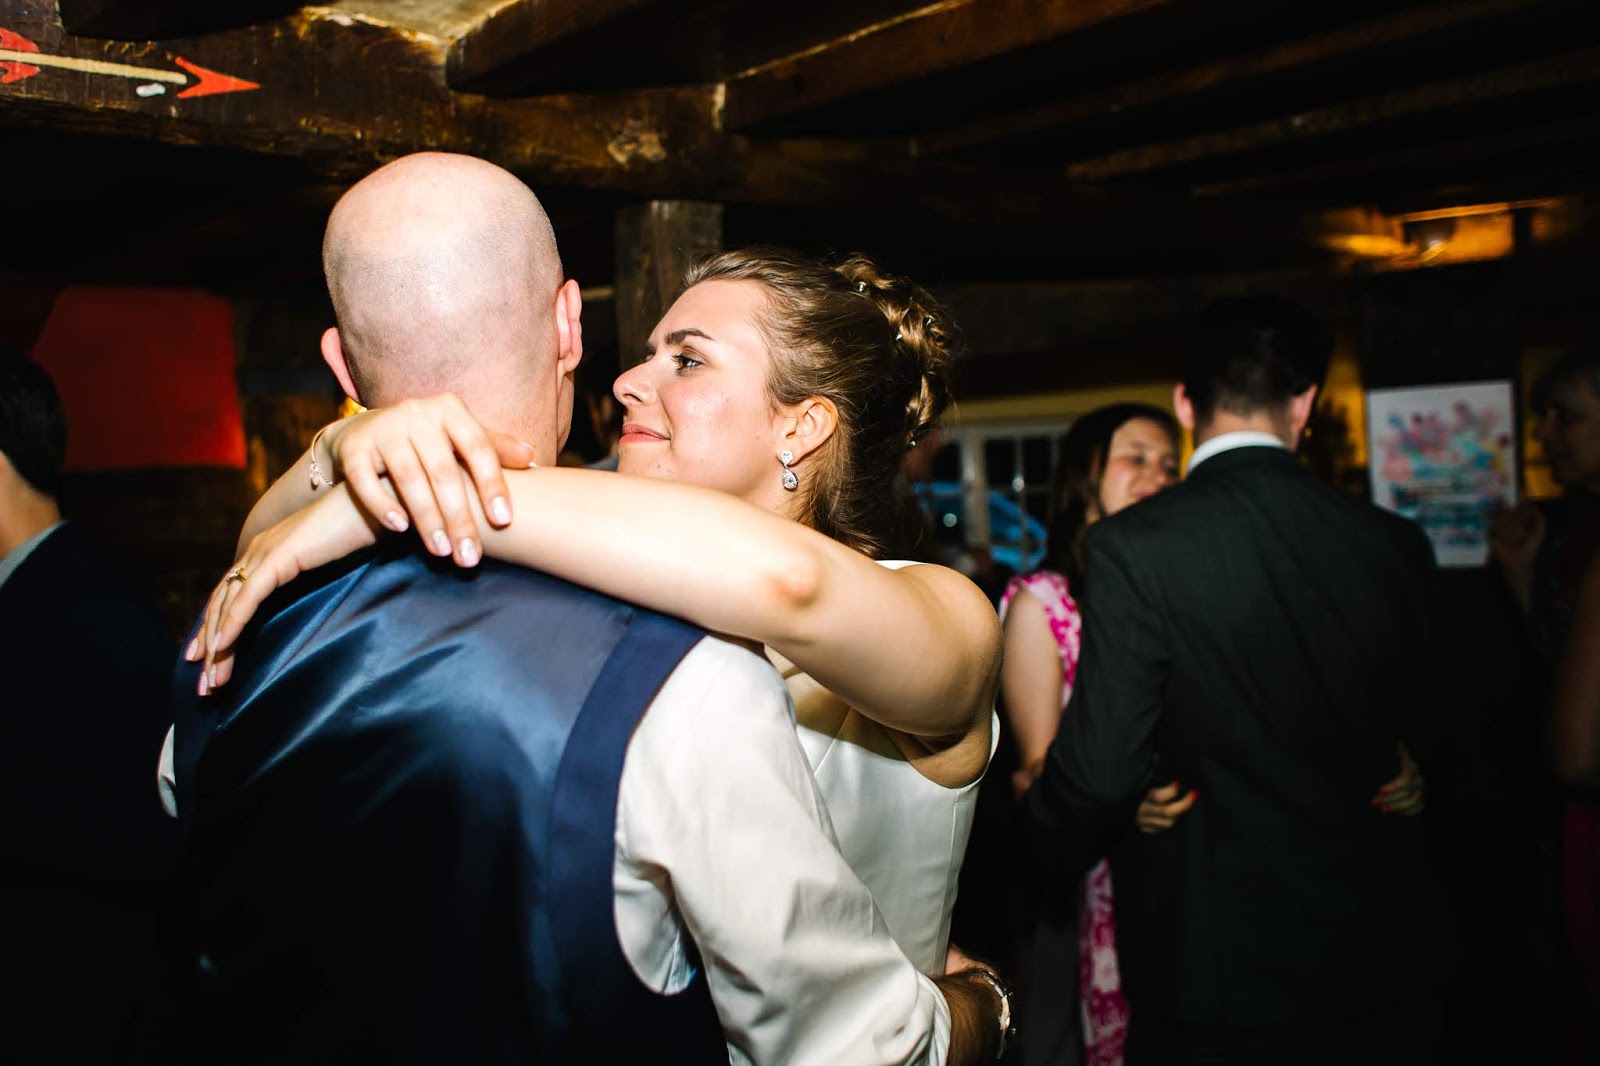 St Albans Wedding: The Party!